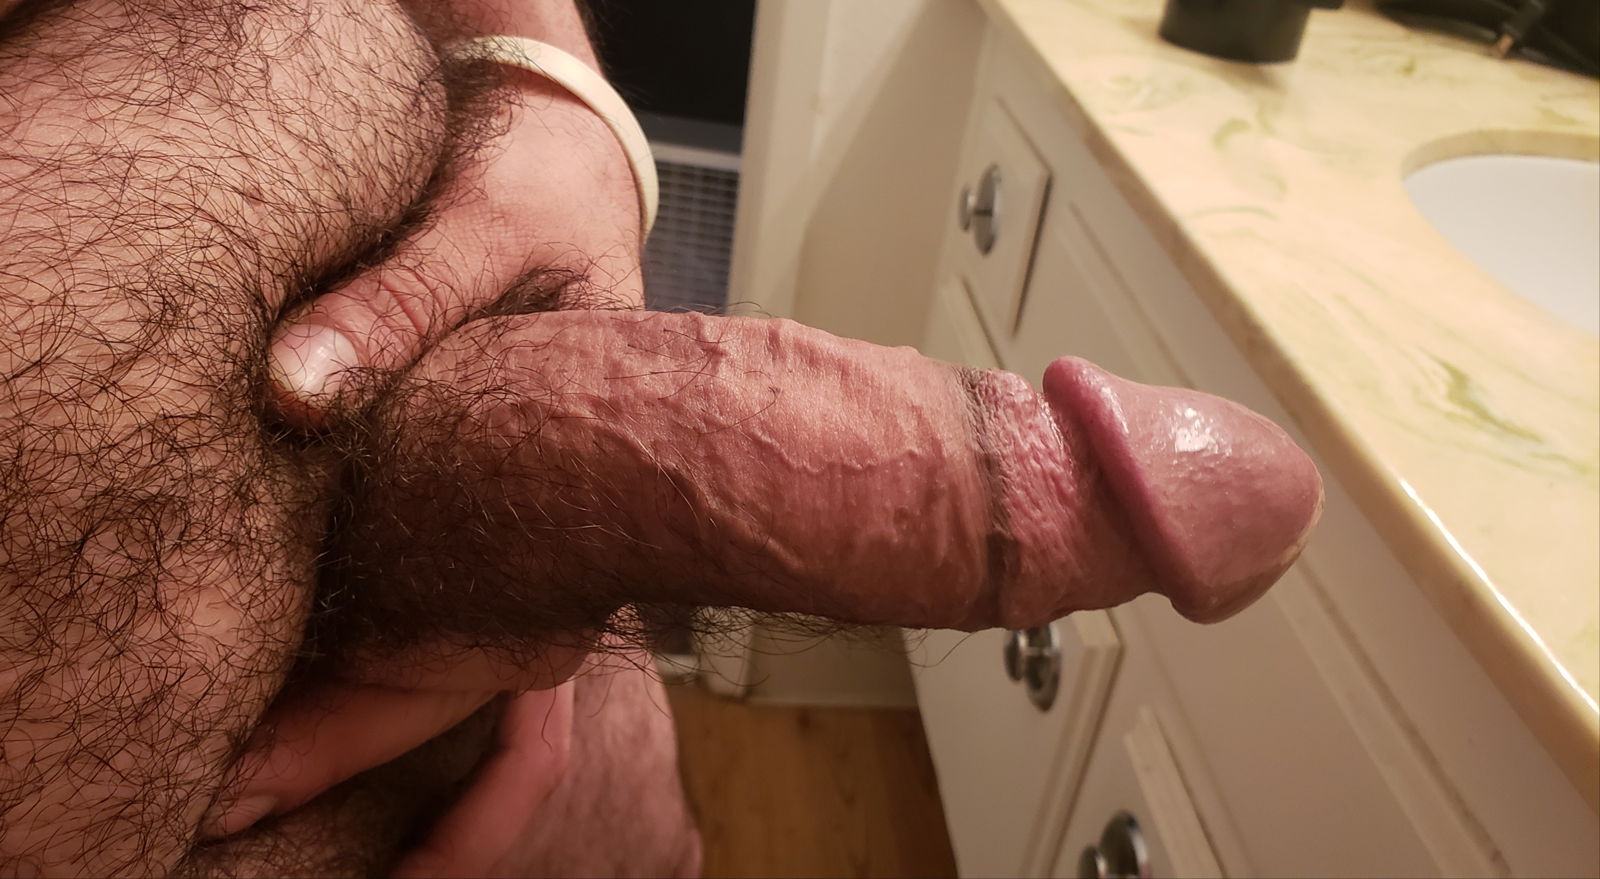 Watch the Photo by Rasz67 with the username @Rasz67, posted on July 23, 2020. The post is about the topic Big dicks. and the text says '#big #veiny #thick #hung #fatcock'